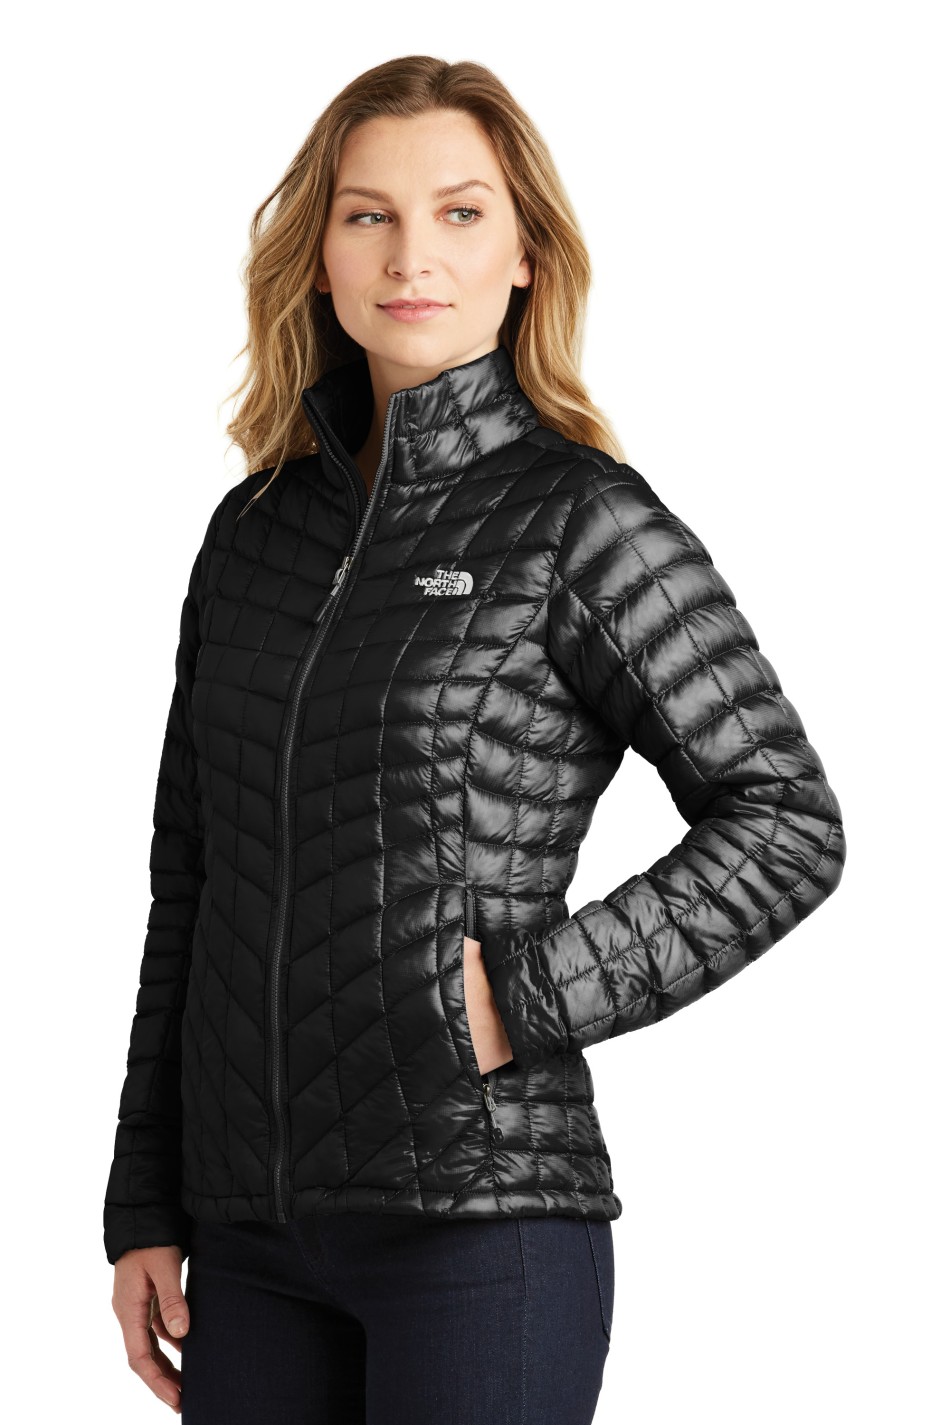 Resign Slime dramatic THE NORTH FACE ® Thermoball ™ Trekker Ladies' Jacket - Just Direct  Promotions